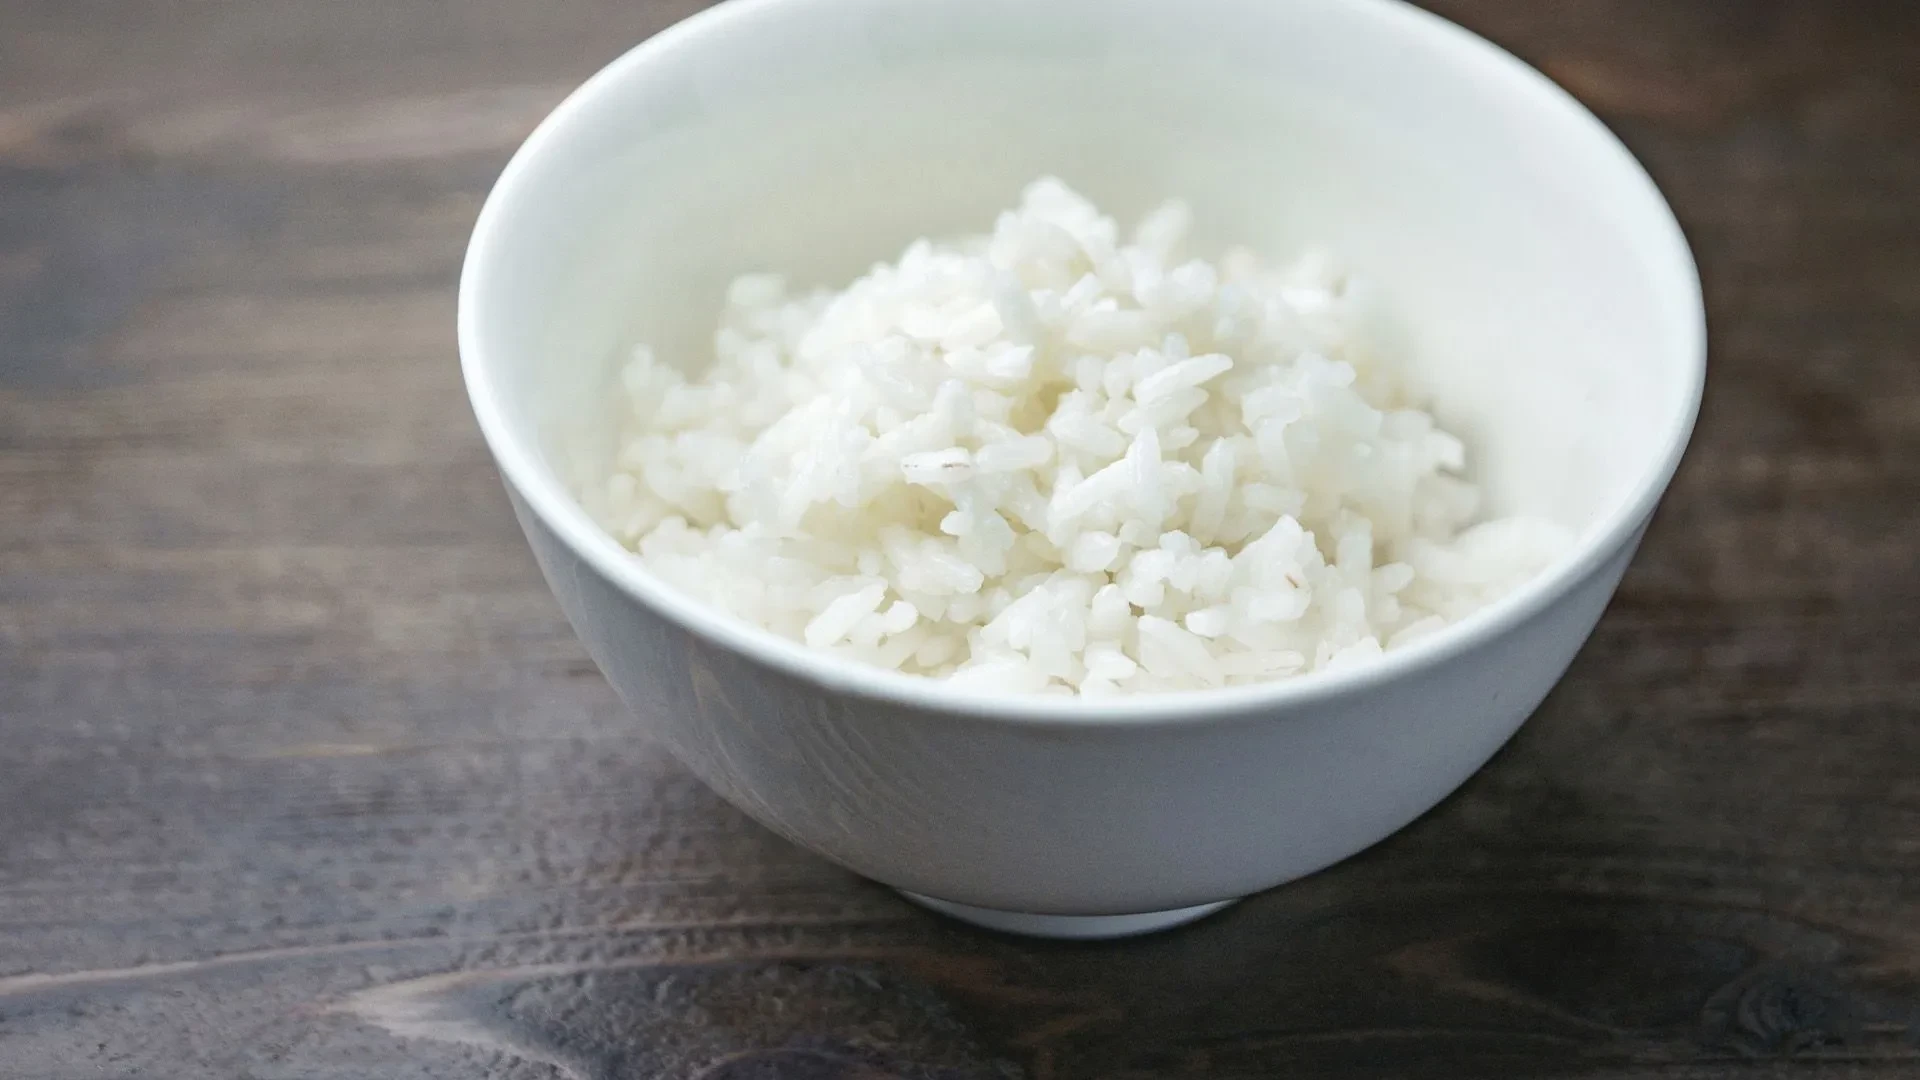 Did you know? Why you should put a bowl of rice in your closet